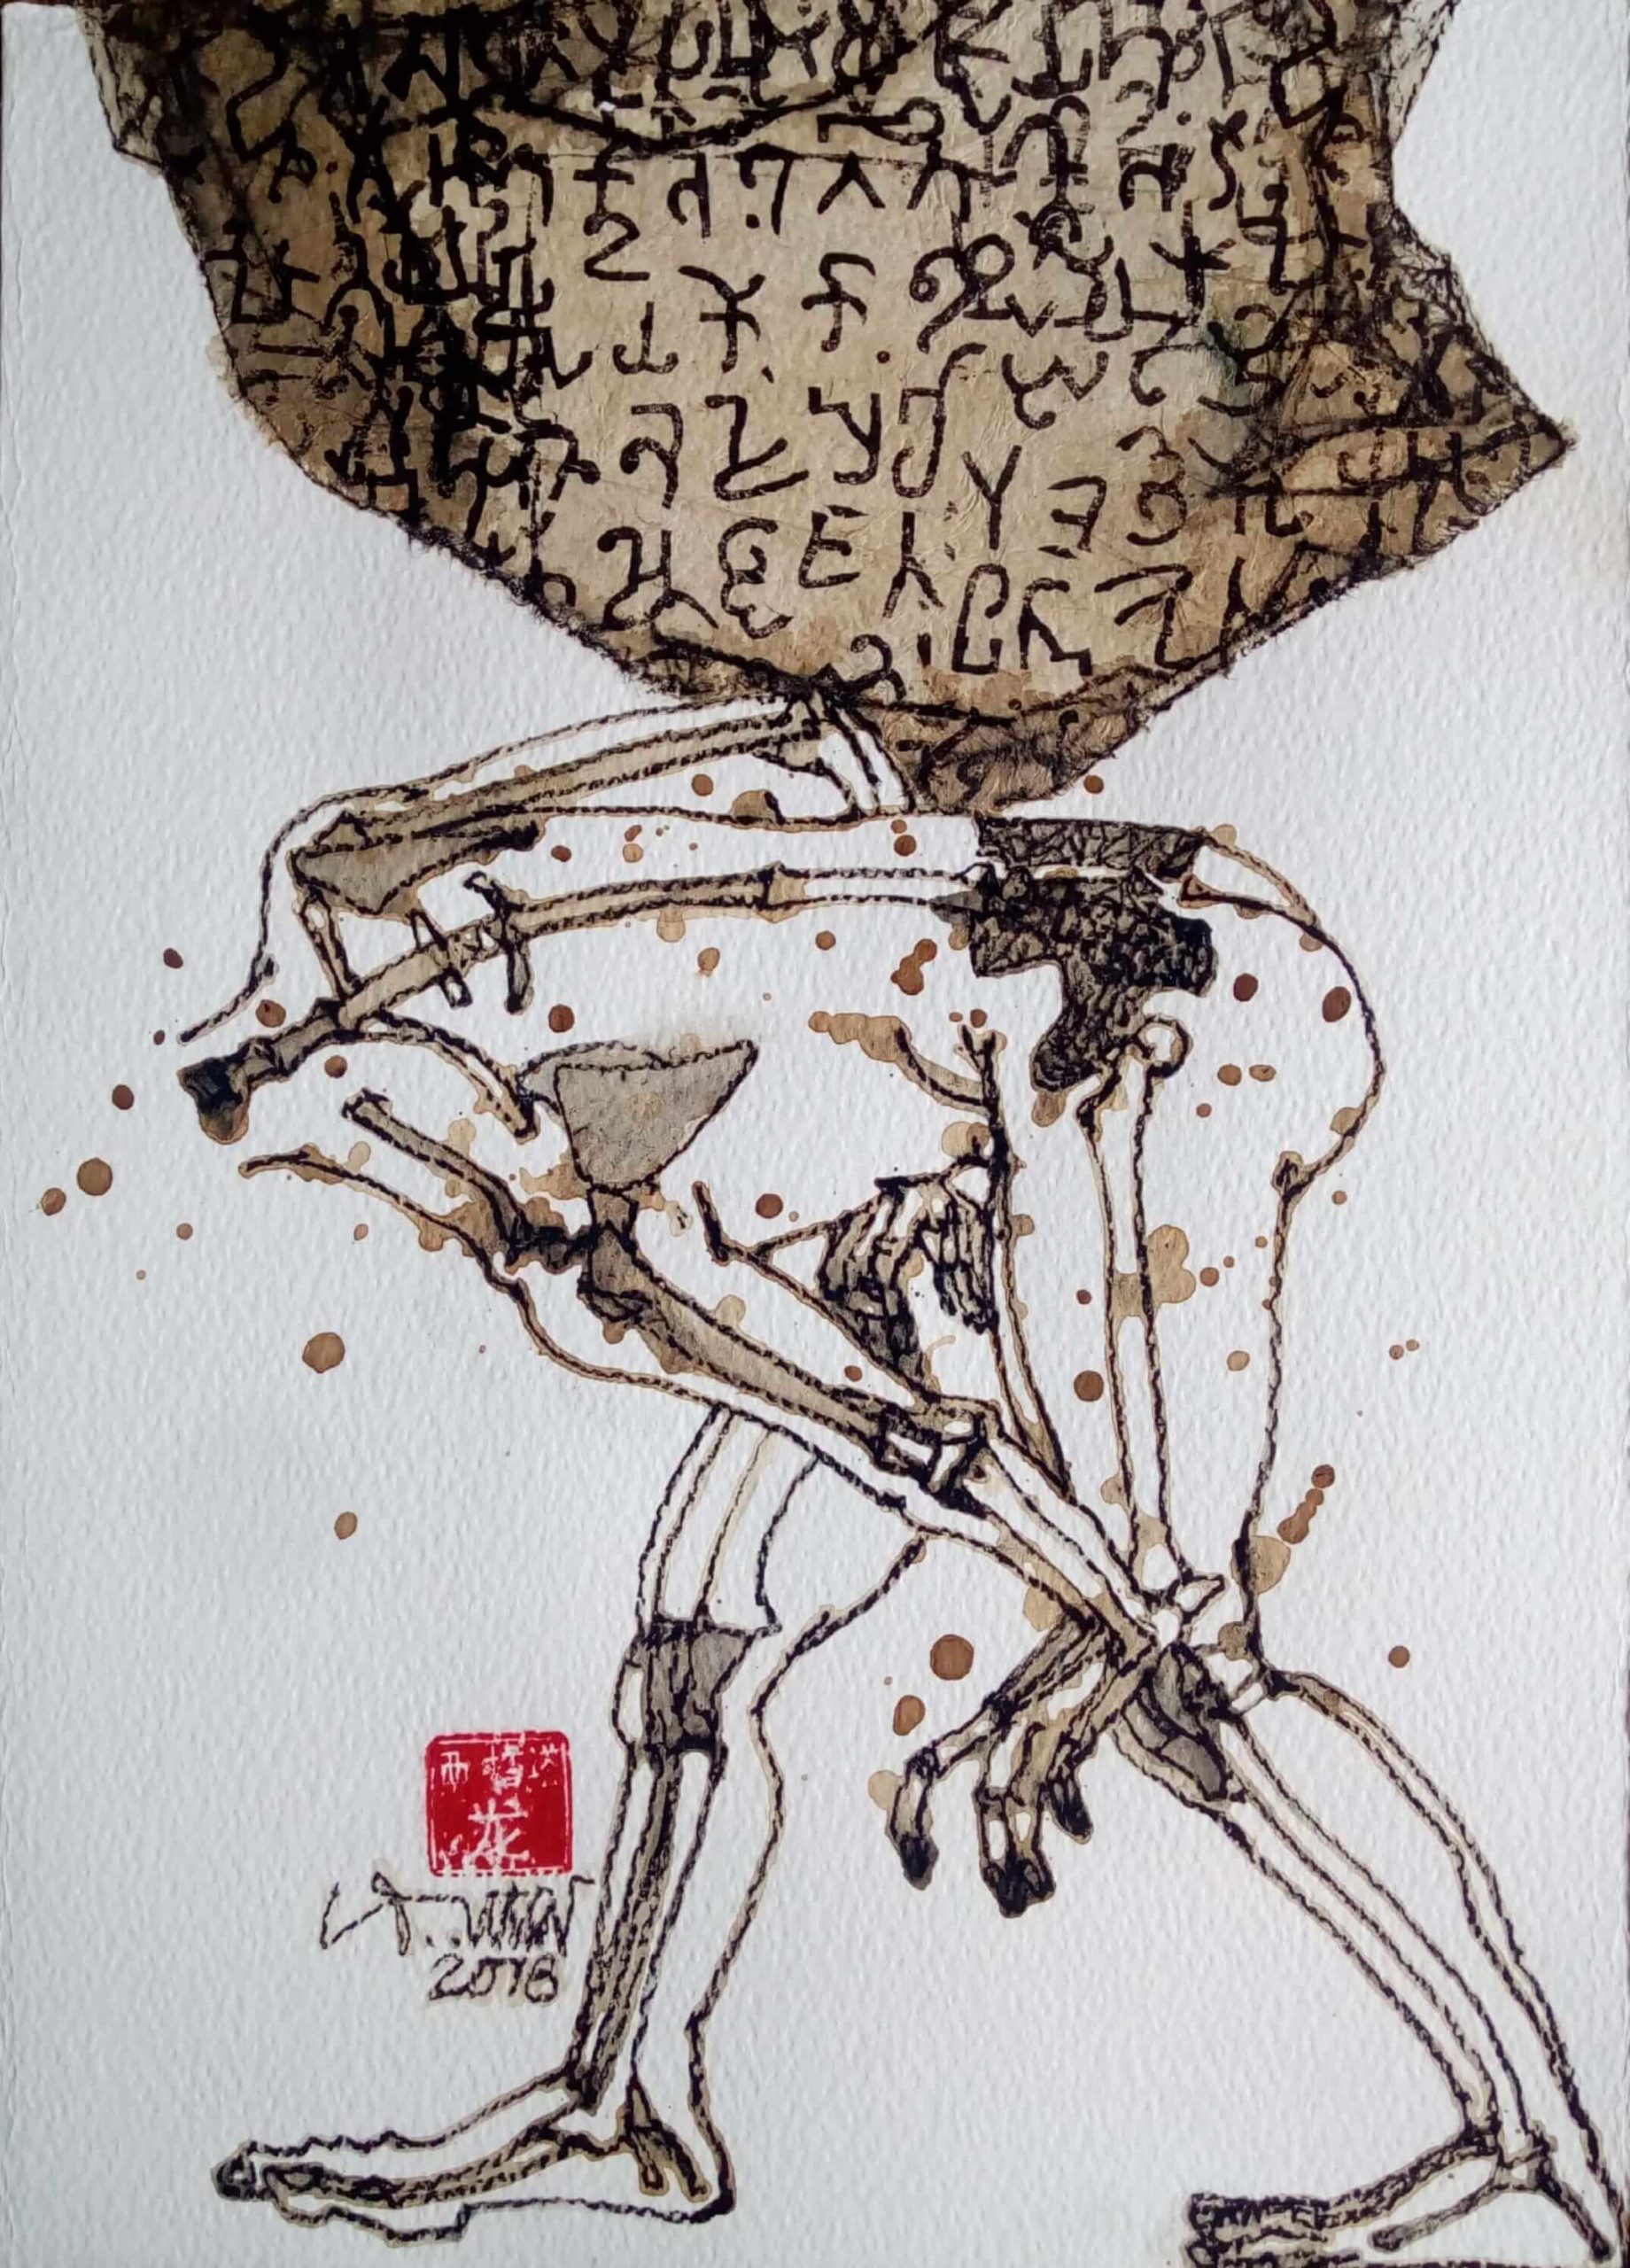 IN THE WORLD OF TEXTUAL HEGEMONY III CHARCOAL TEA STAIN PRINT ON NEPALI PAPER